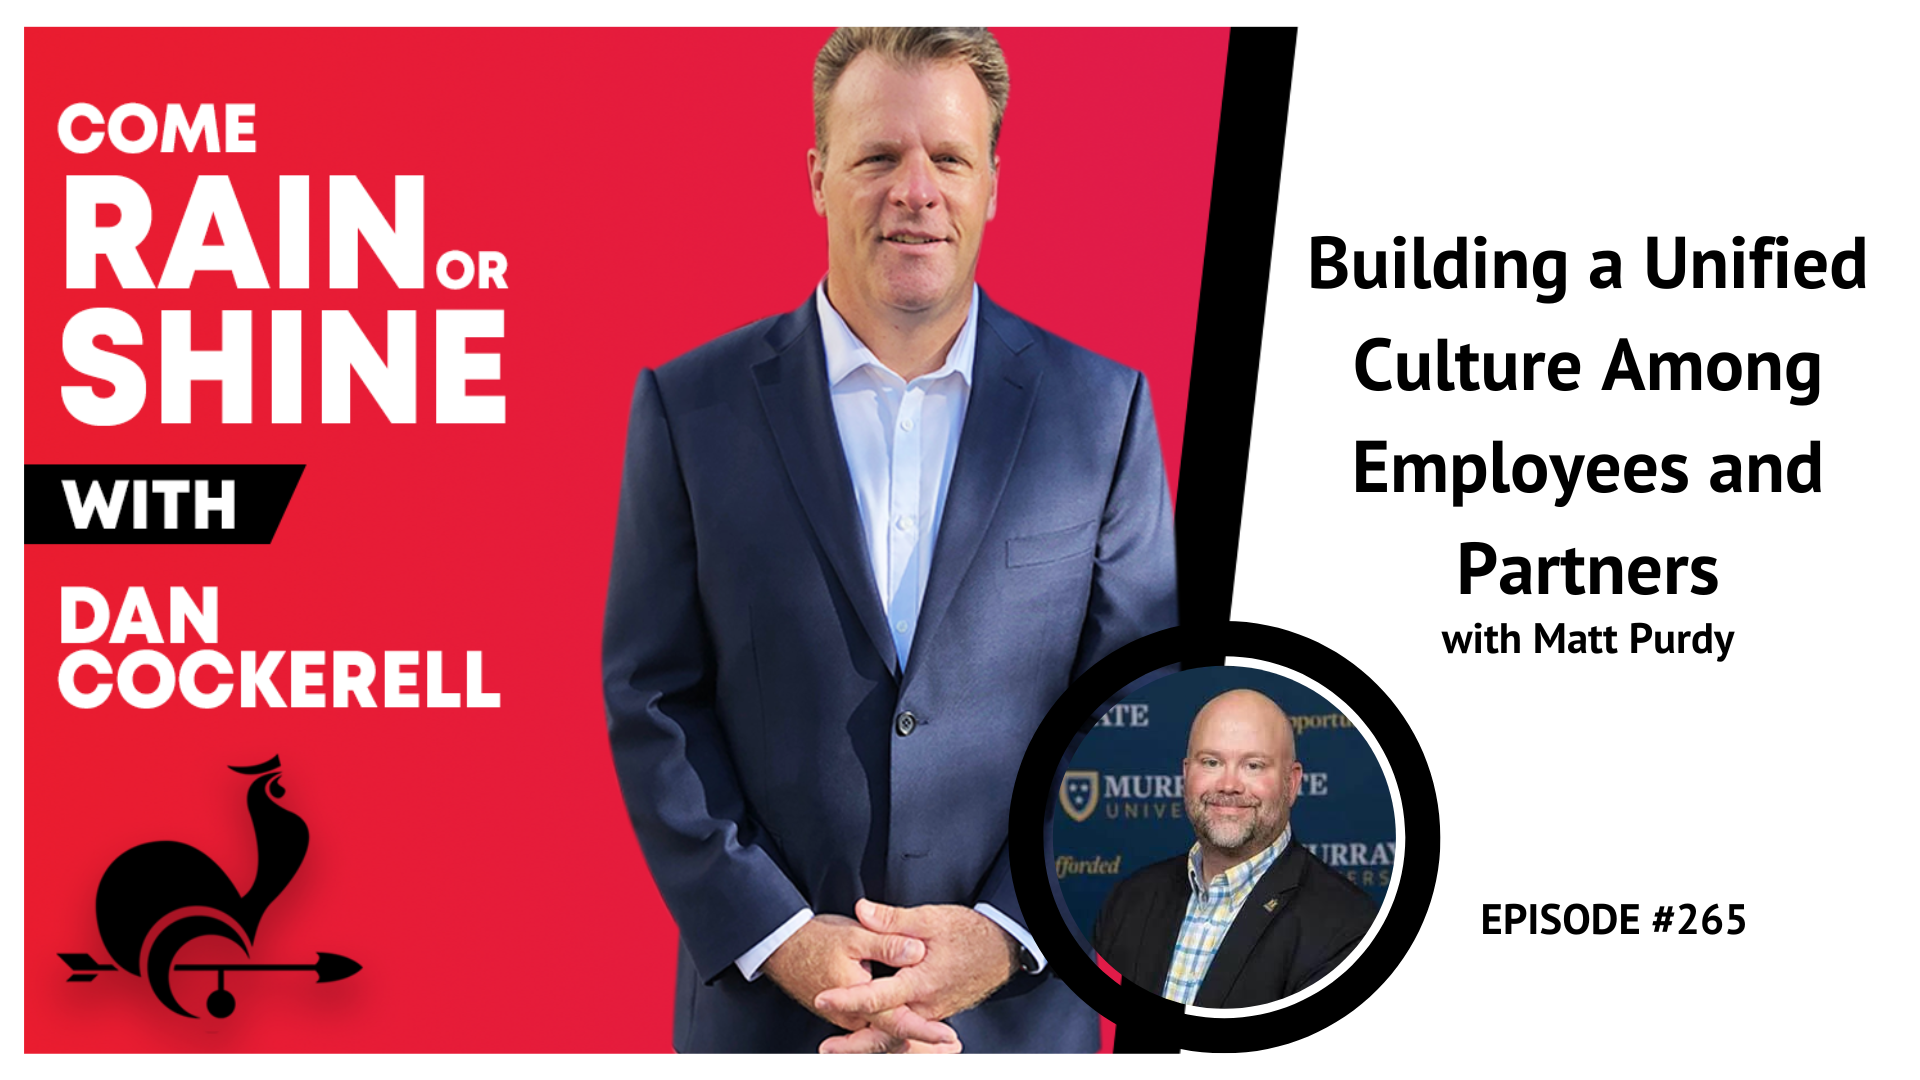 Come Rain or Shine Episode 265 Matt Purdy building a unified culture among employees and partners